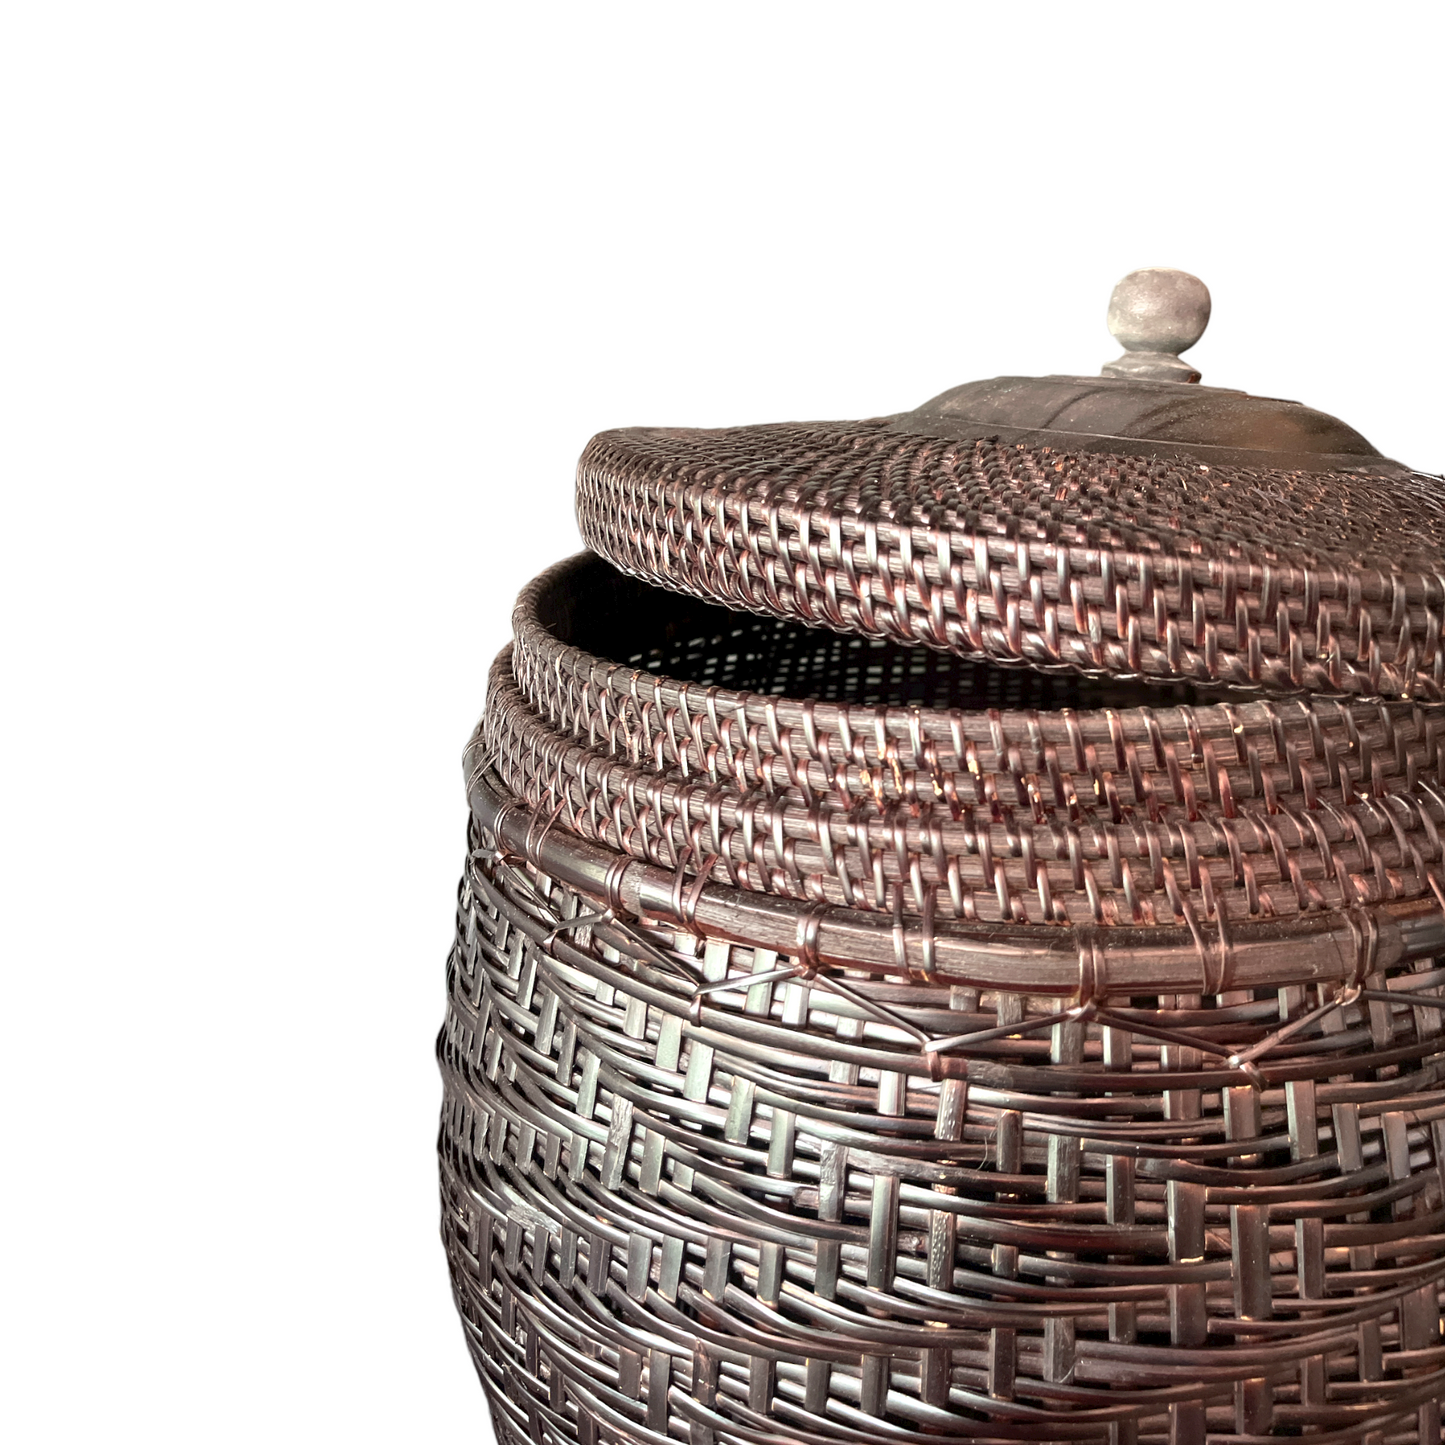 Crafted by skilled artisans from East Indonesian Island Villages using locally-sourced rattan and bamboo, the Cahyono Handmade Rattan & Bamboo Basket is visually stunning and exceptionally functional. Their deep, rich brown and black colour is complemented by a sturdy lid and wooden handle, making them the perfect choice for decorative accents or convenient storage solutions. Close up.